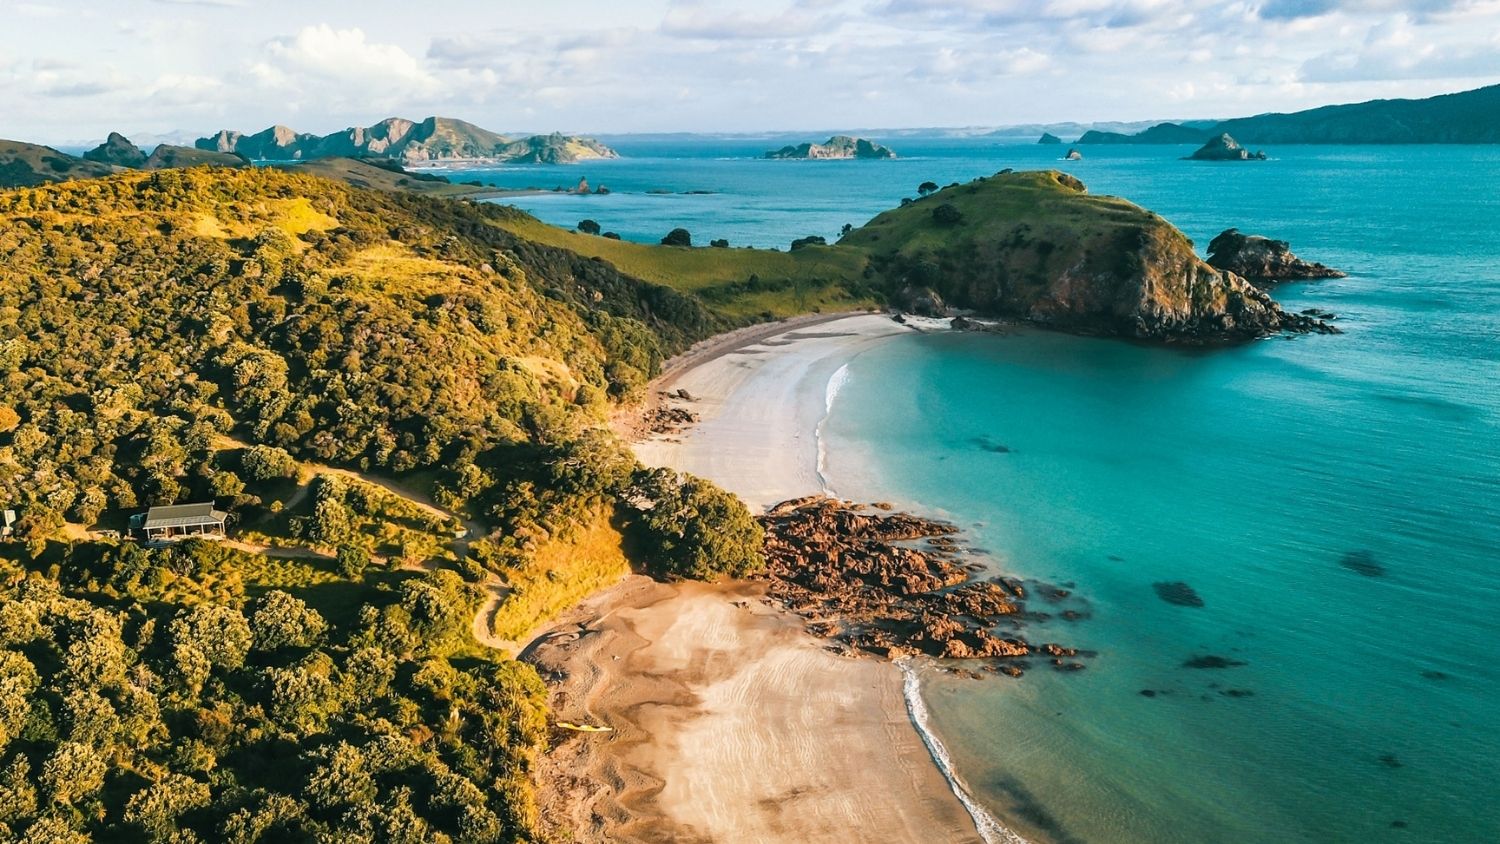 Good news for travellers! New Zealand reopens on May 1st. View of Cavalli Island, New Zealand